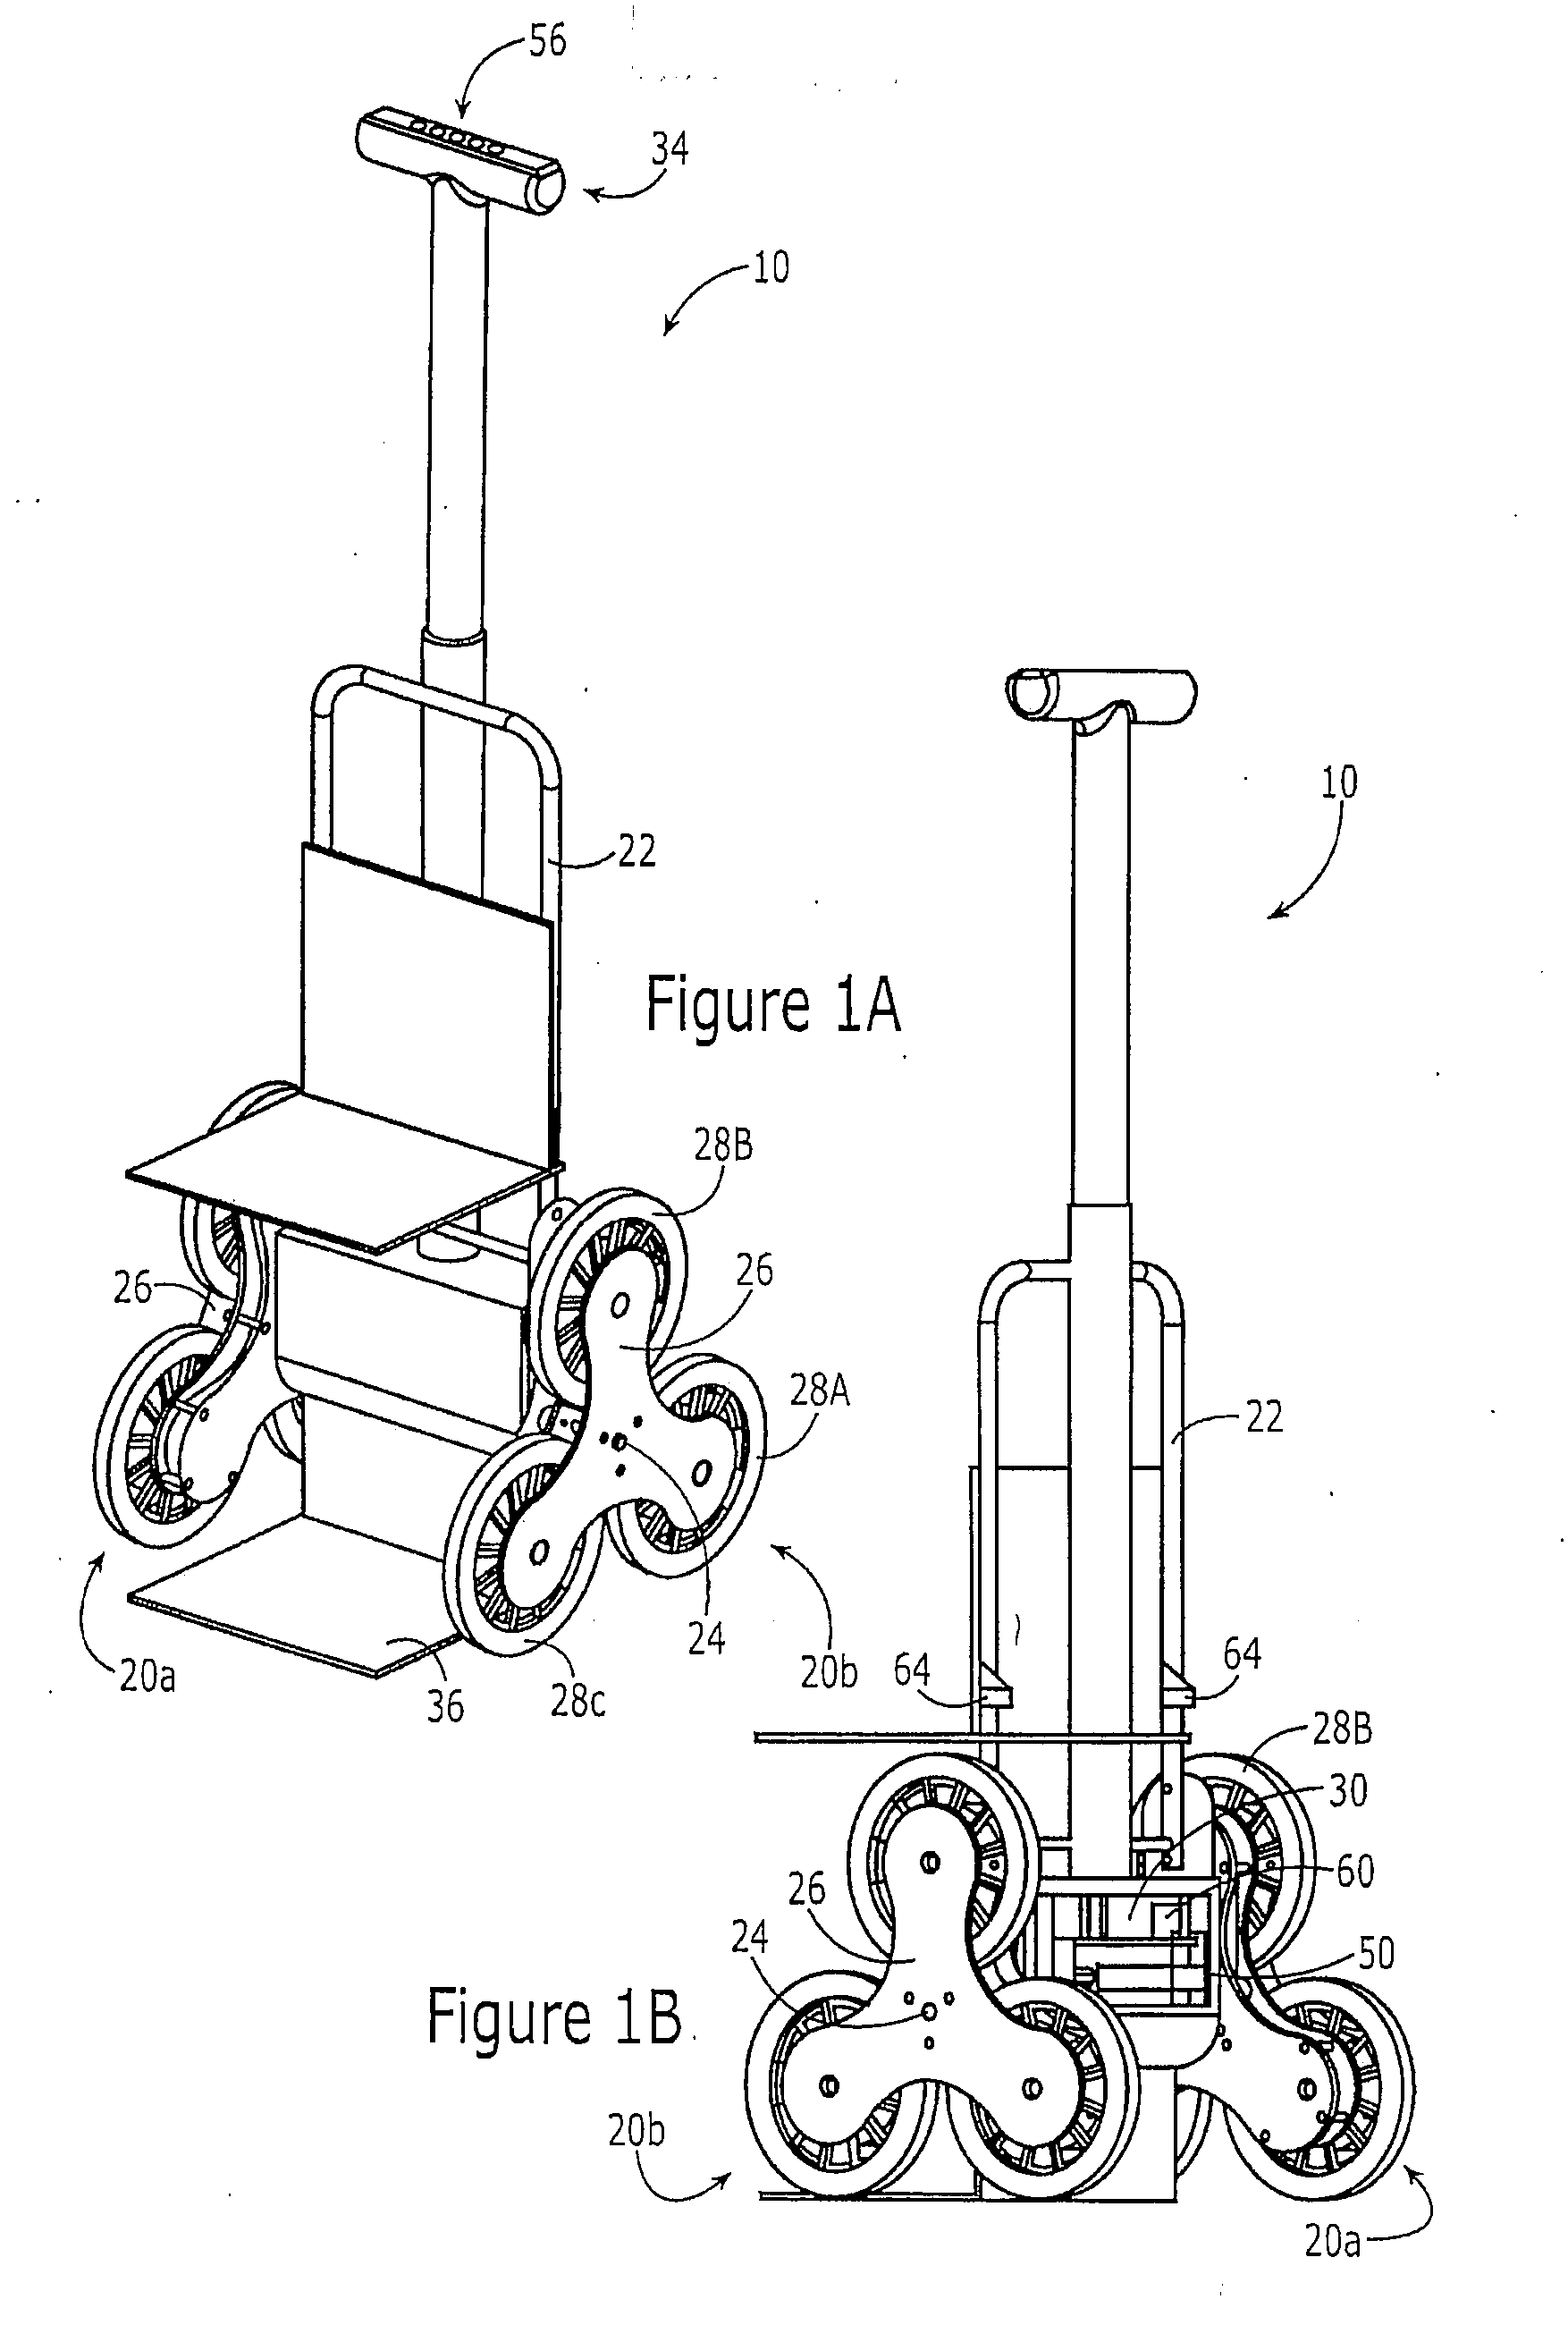 Mechanical Tri-Wheel Retention Assembly for Stair-Climbing Wheeled Vehicle